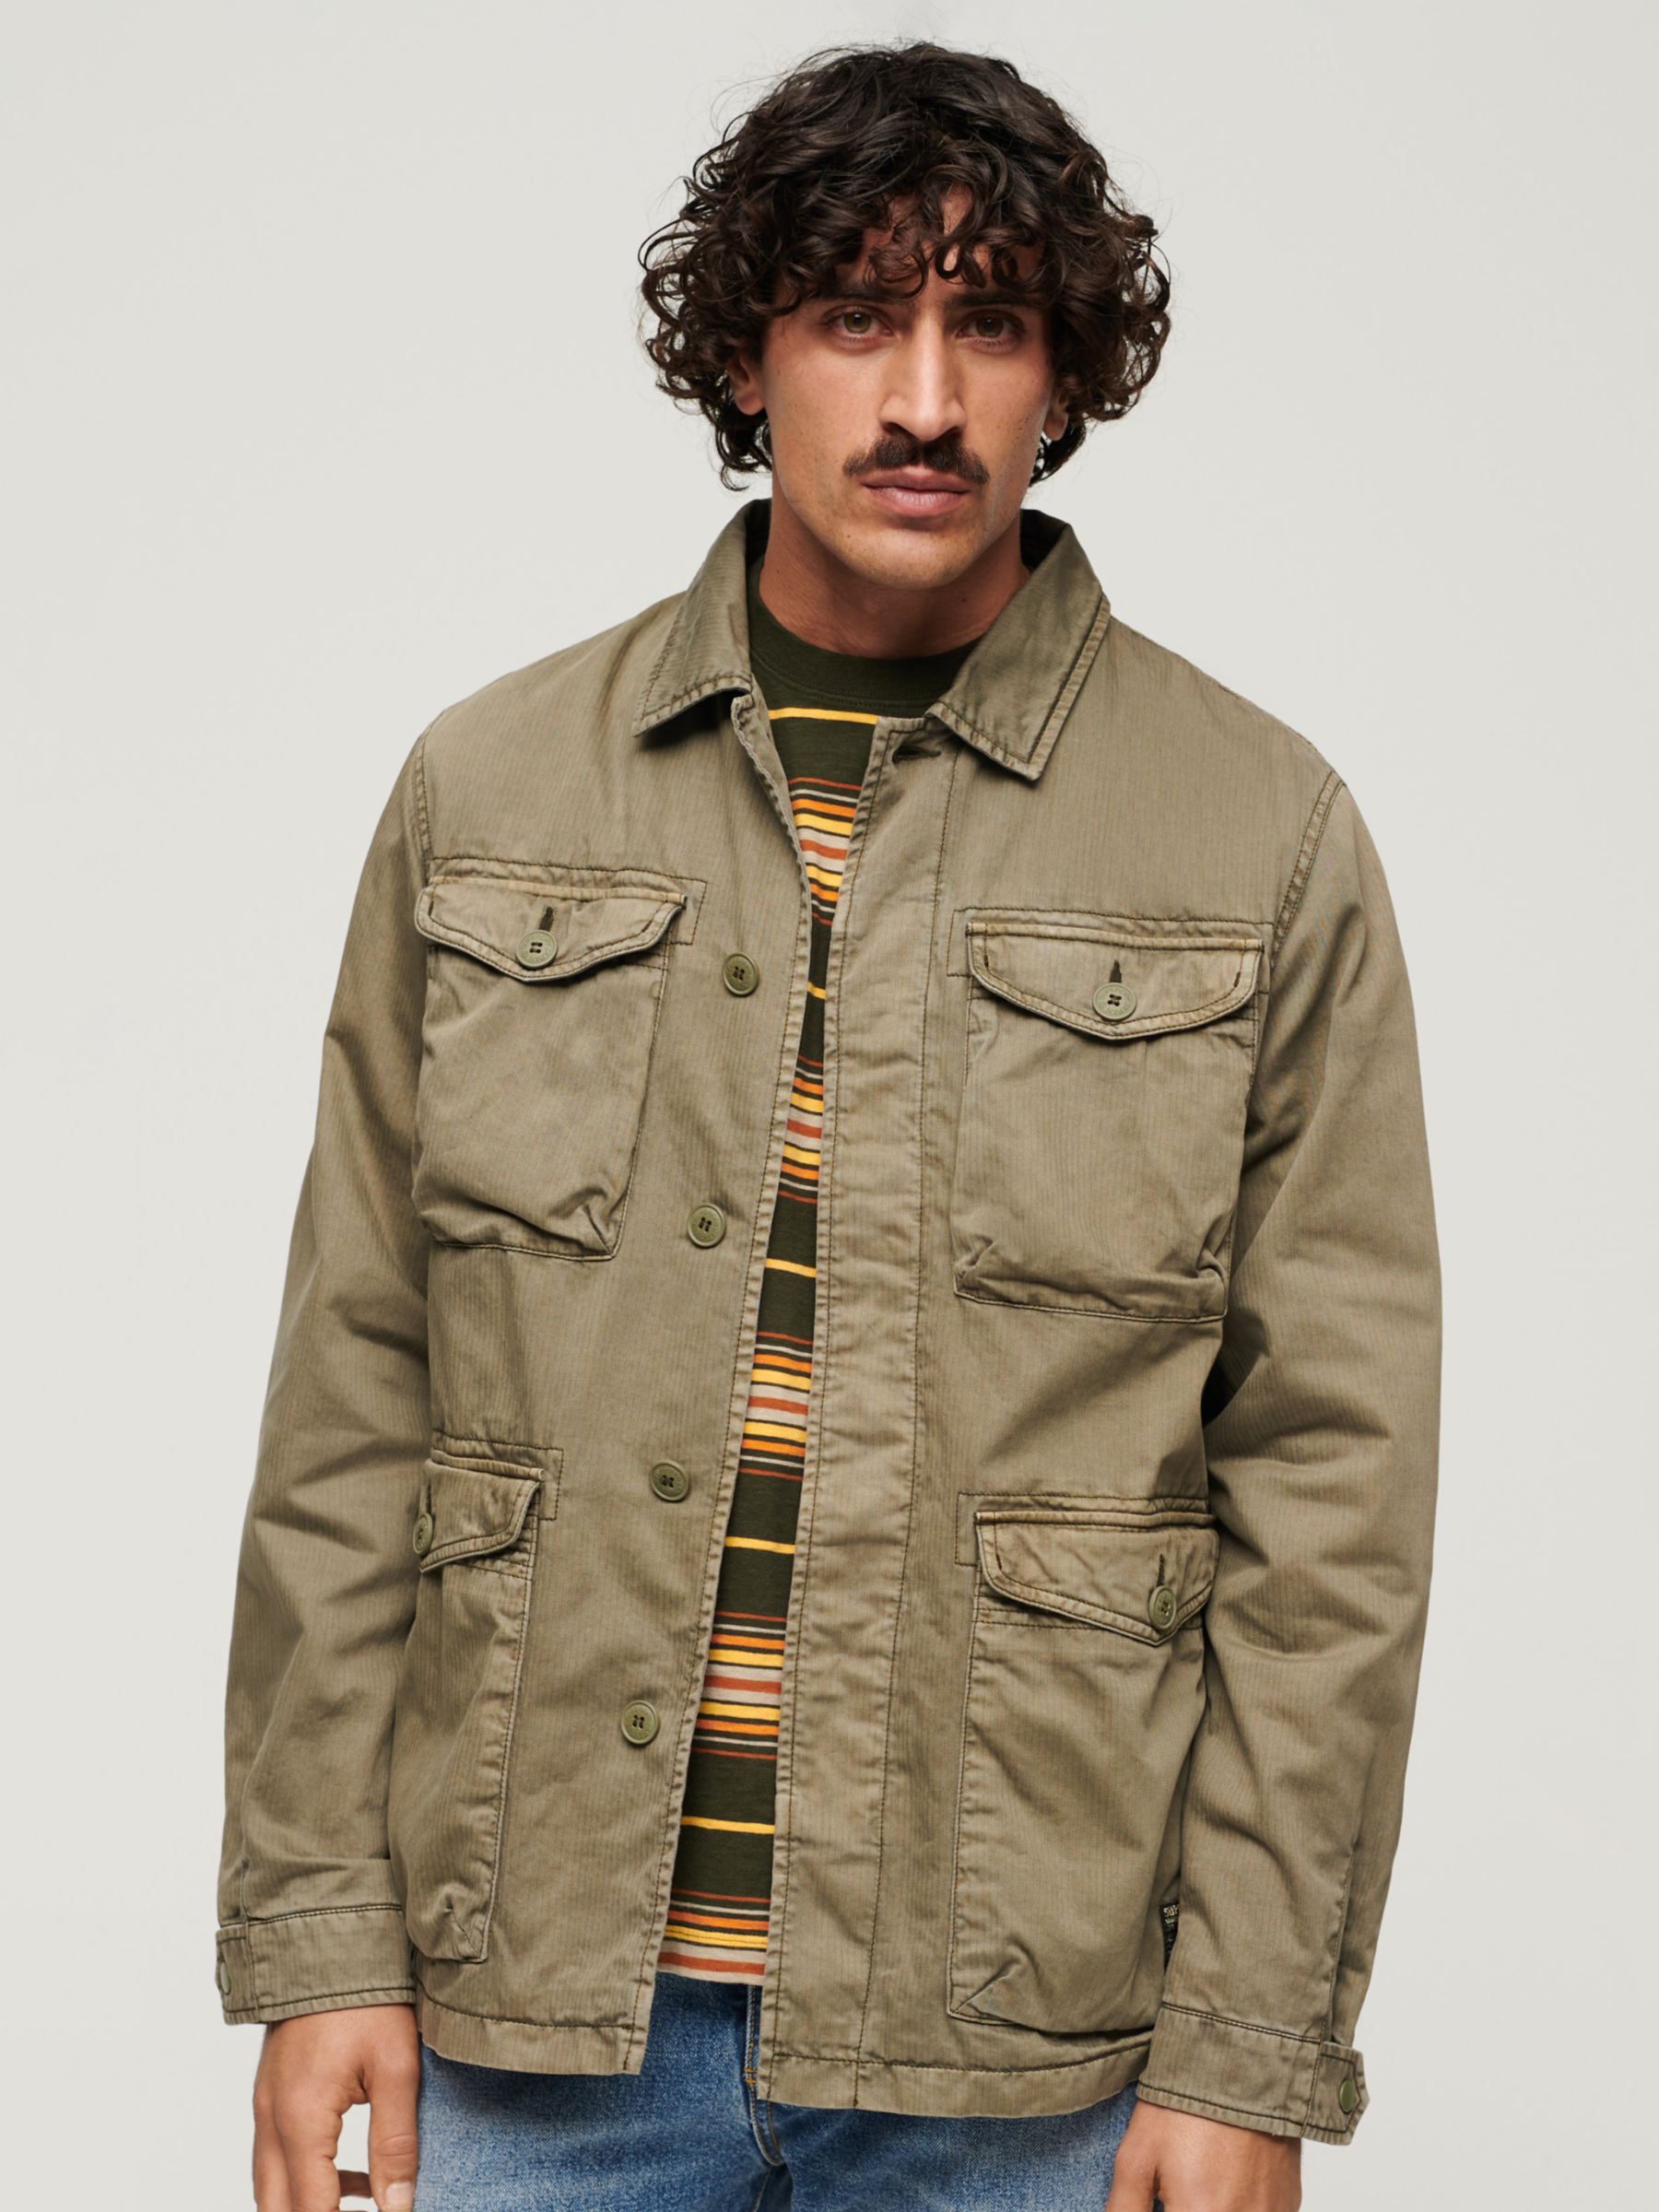 Superdry Military M65 Lightweight Jacket, Dusty Olive Green, XXL